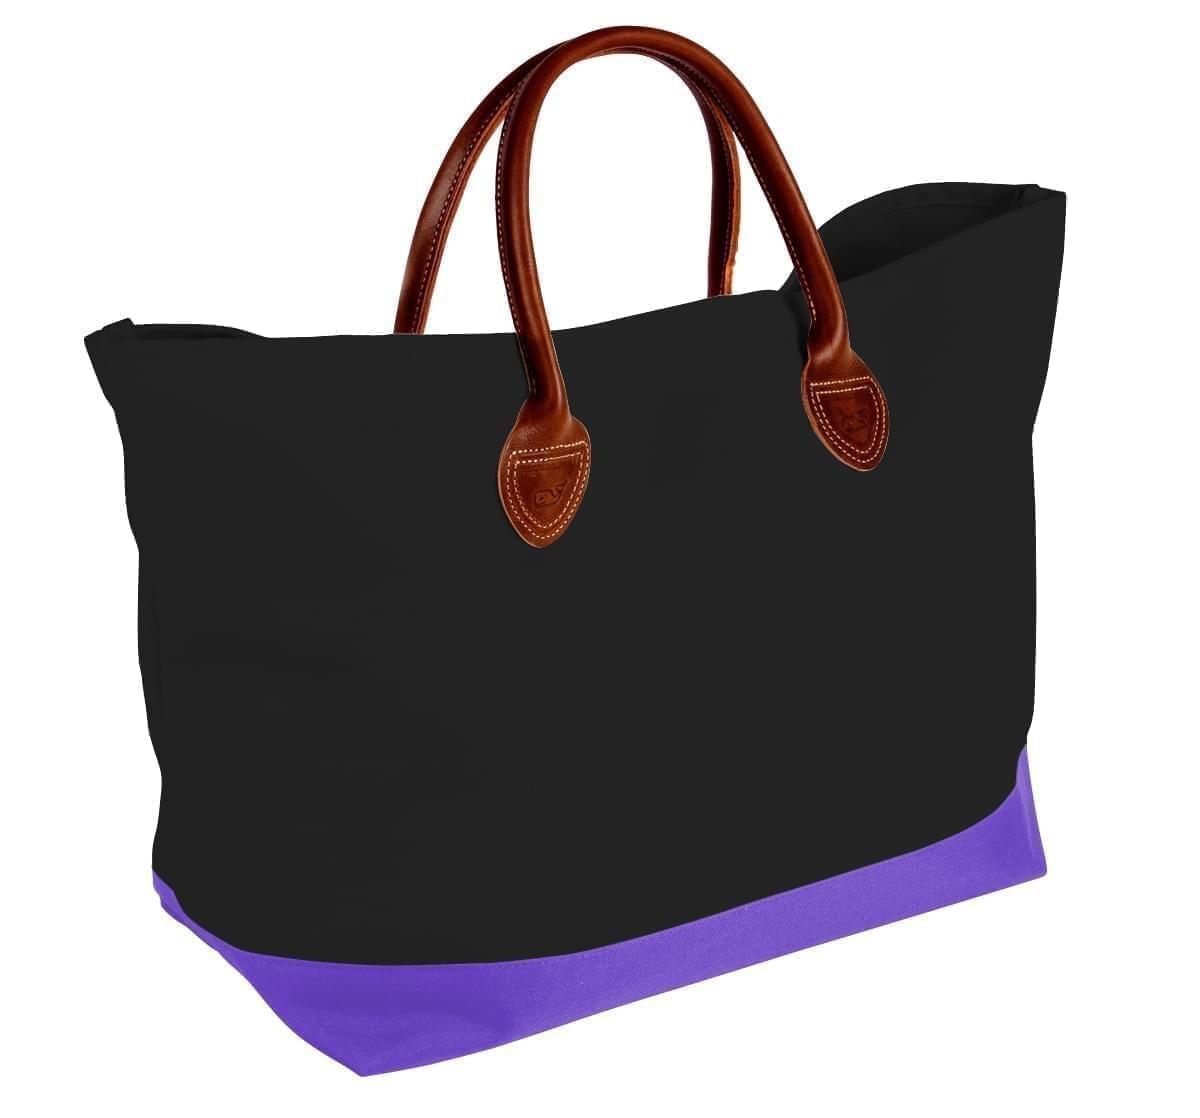 USA Made Canvas Leather Handle Totes, Black-Purple, 10899-KH9